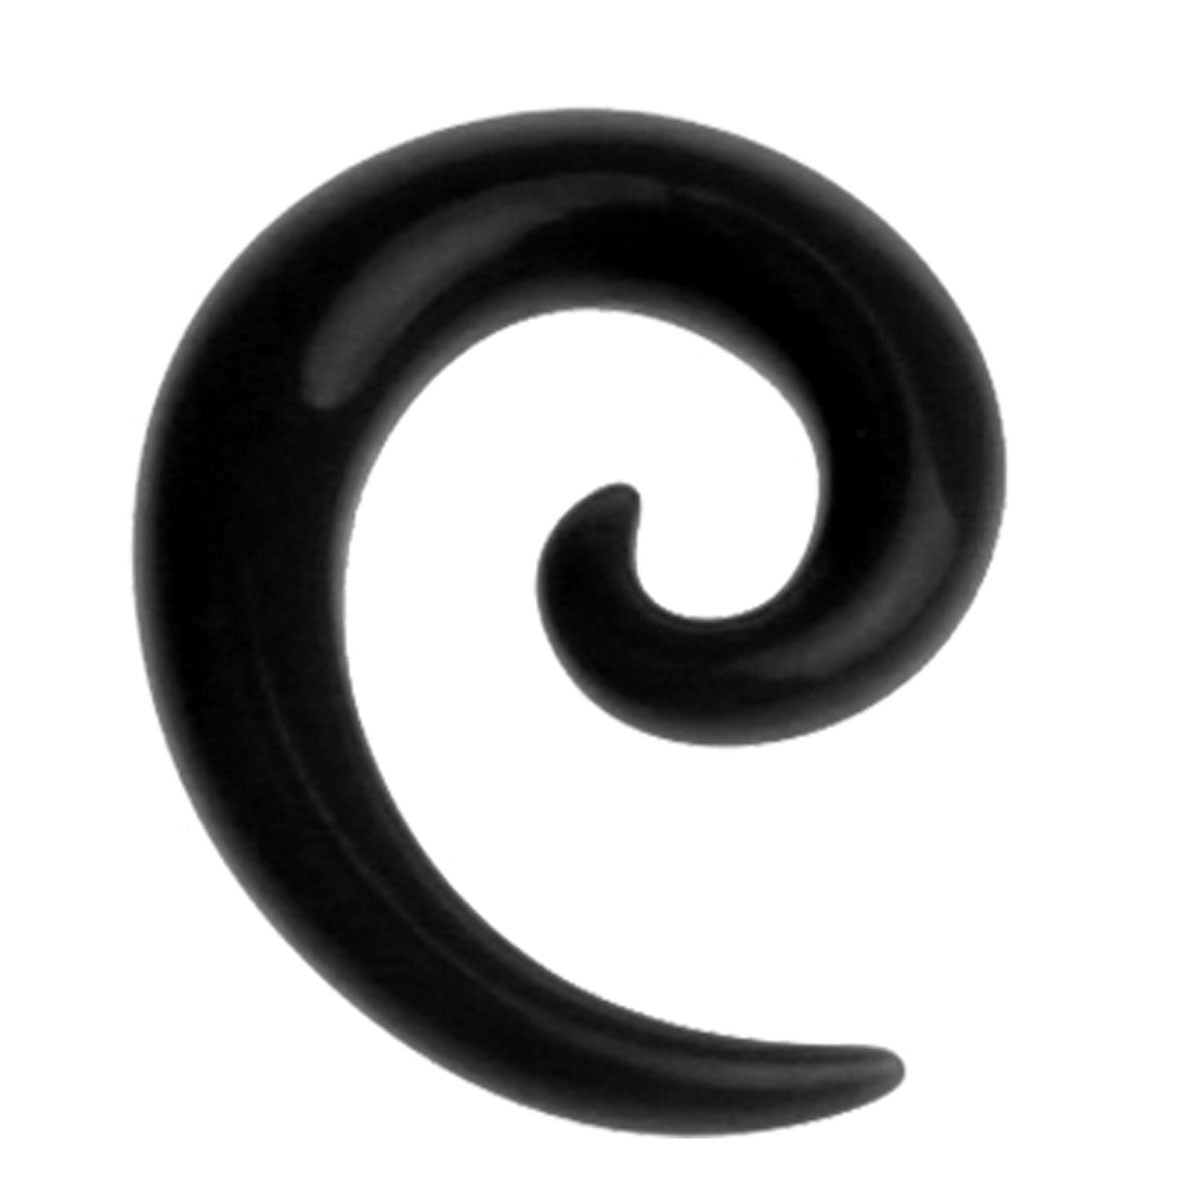 Spiral stretch earring 10mm (acrylic)